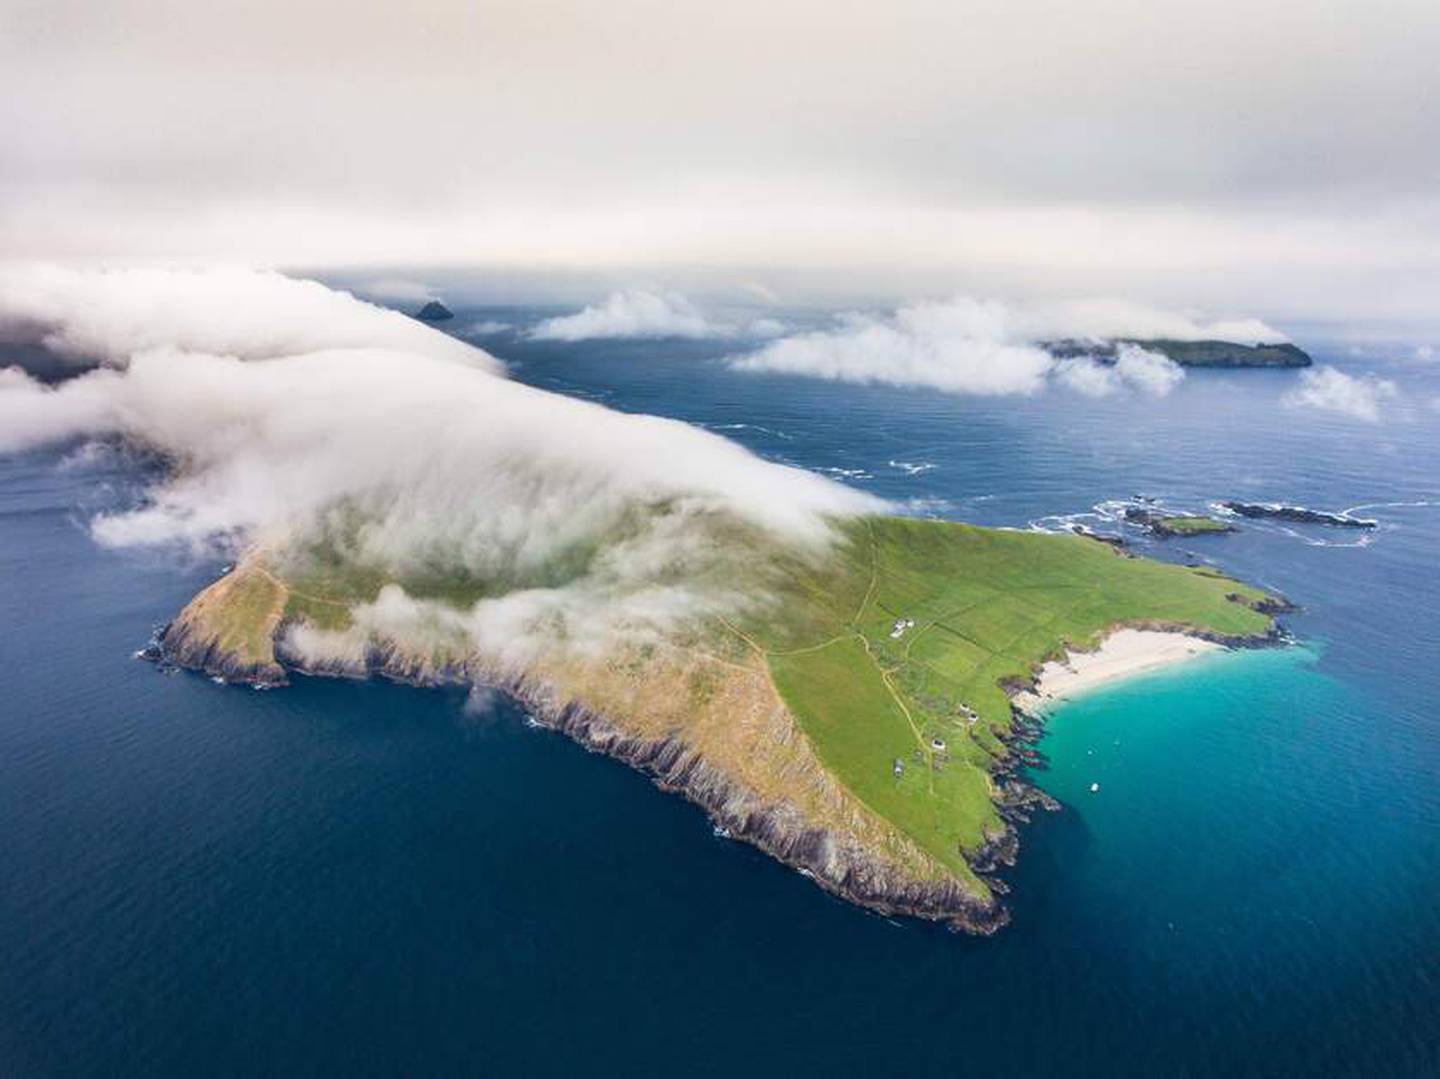 With no hot water on the island, a warm bath after a wet day is one luxury that visitors to Great Blasket Island have to forgo. Tourism Ireland